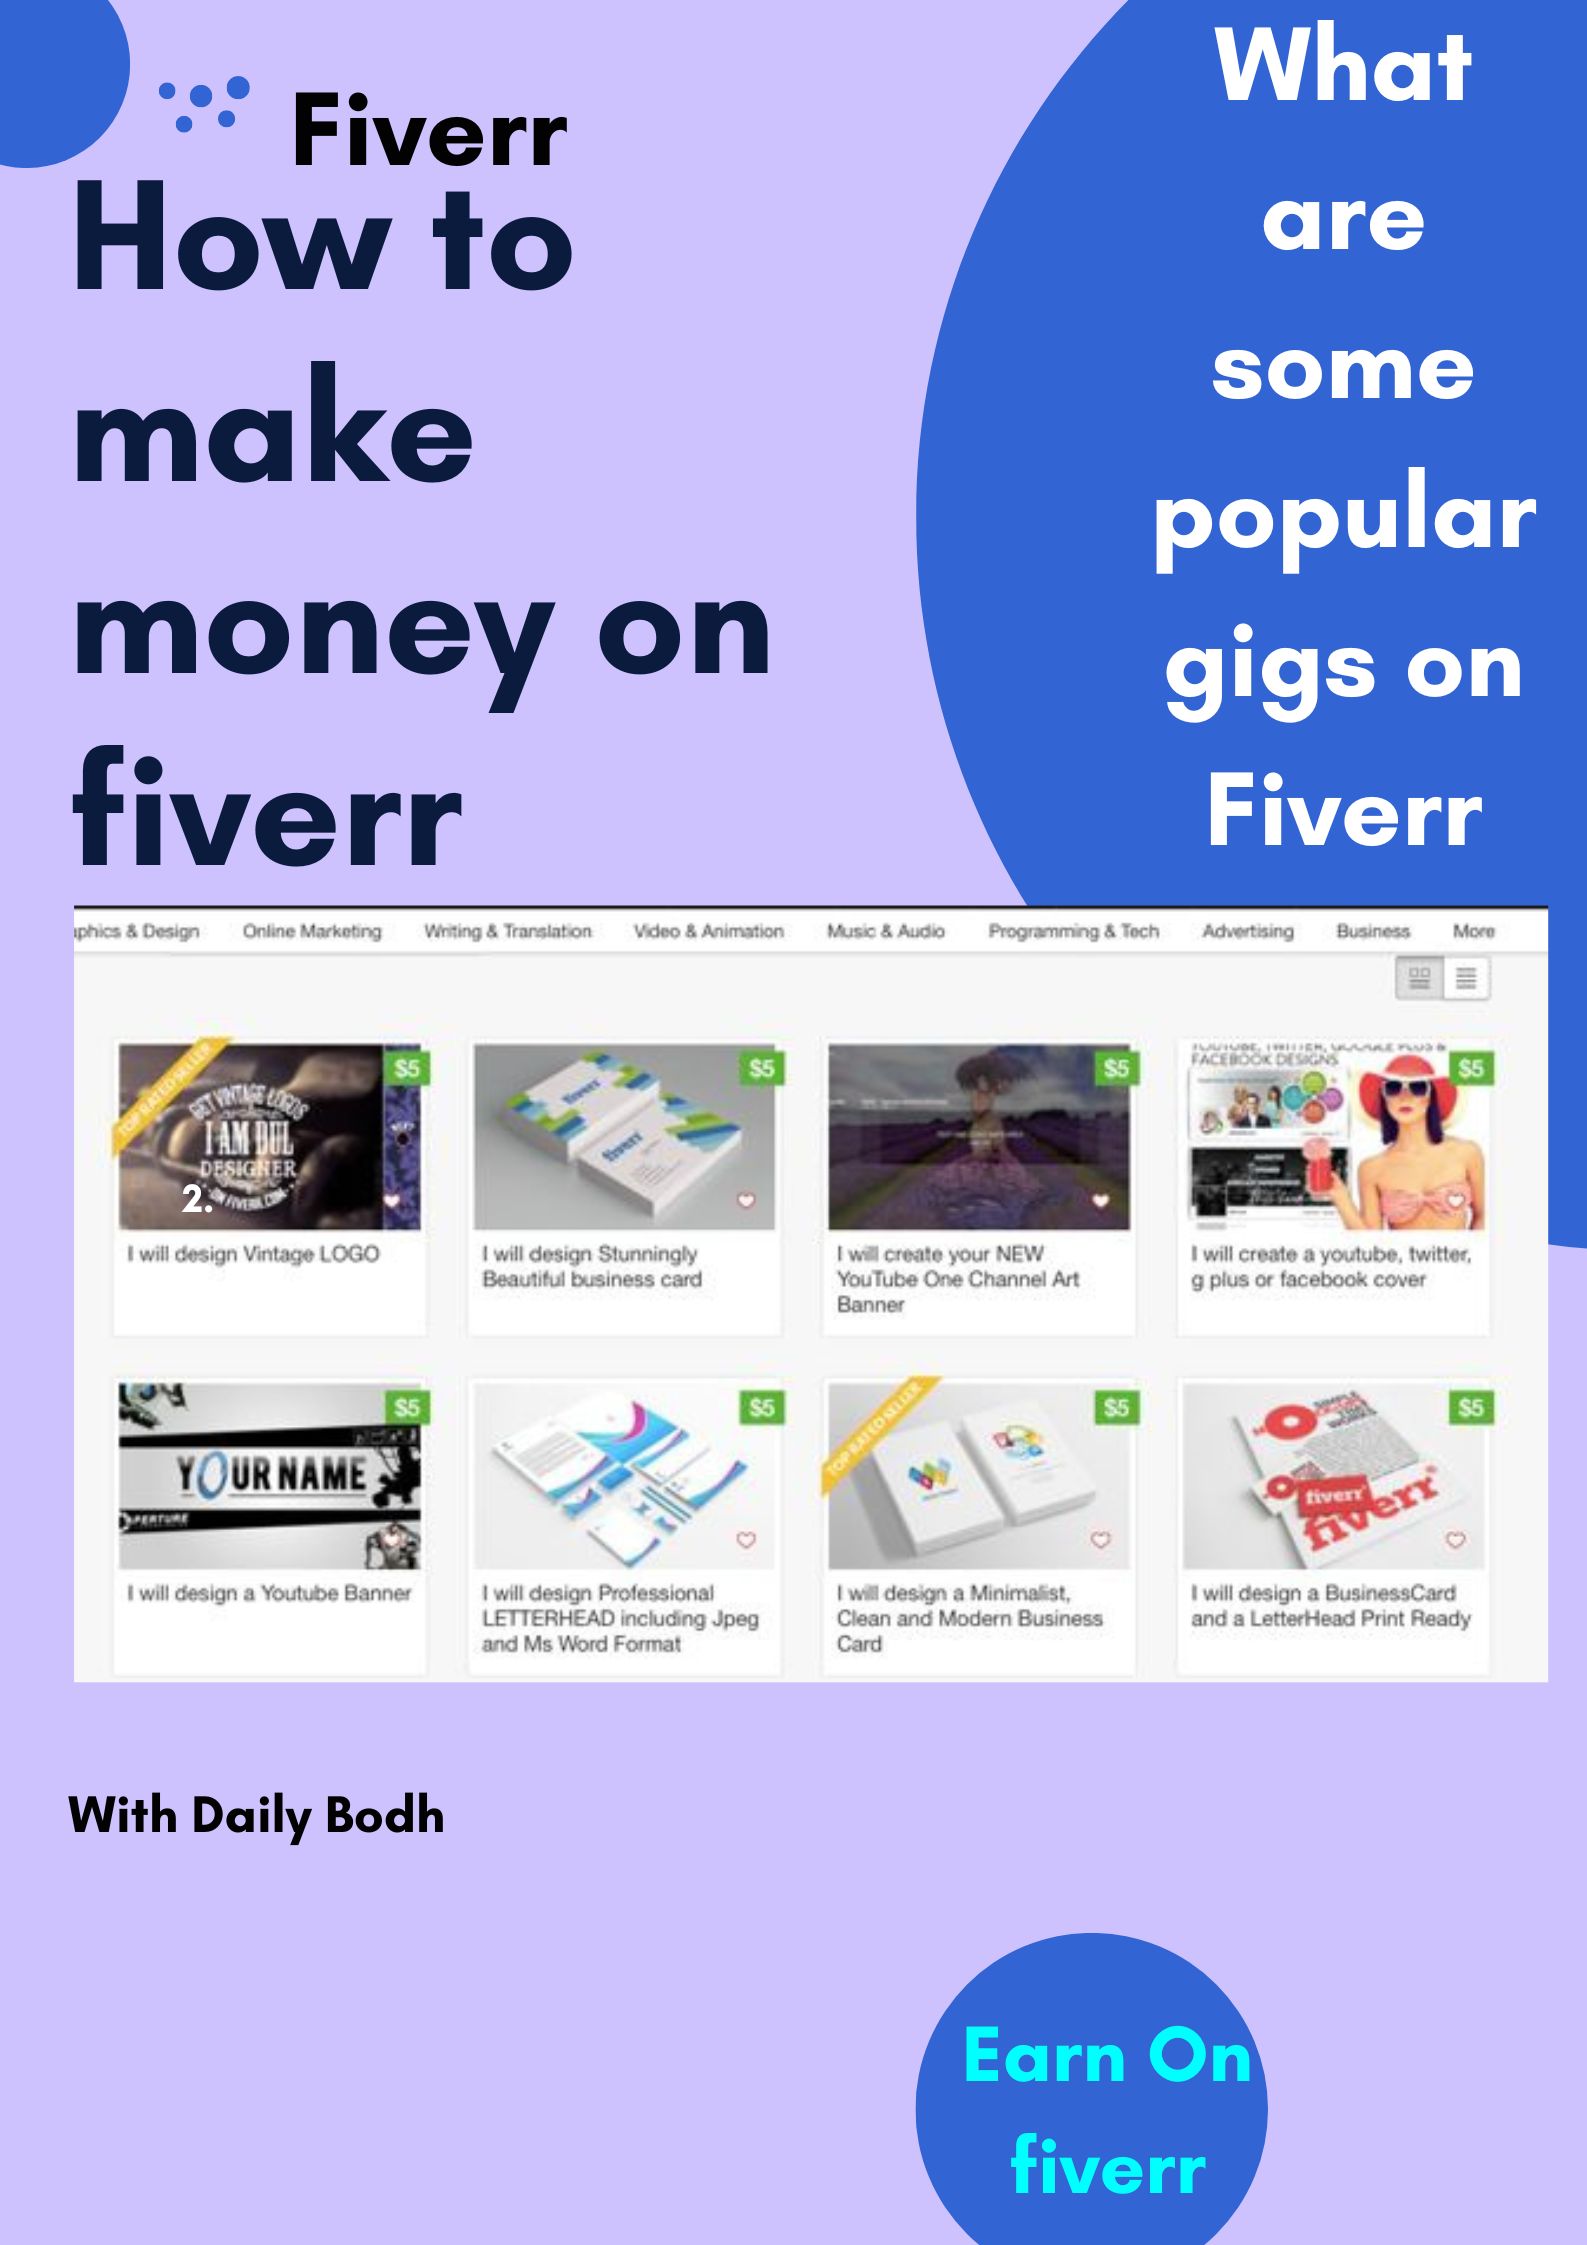 What are some popular gigs on Fiverr (How to make money on fiverr)